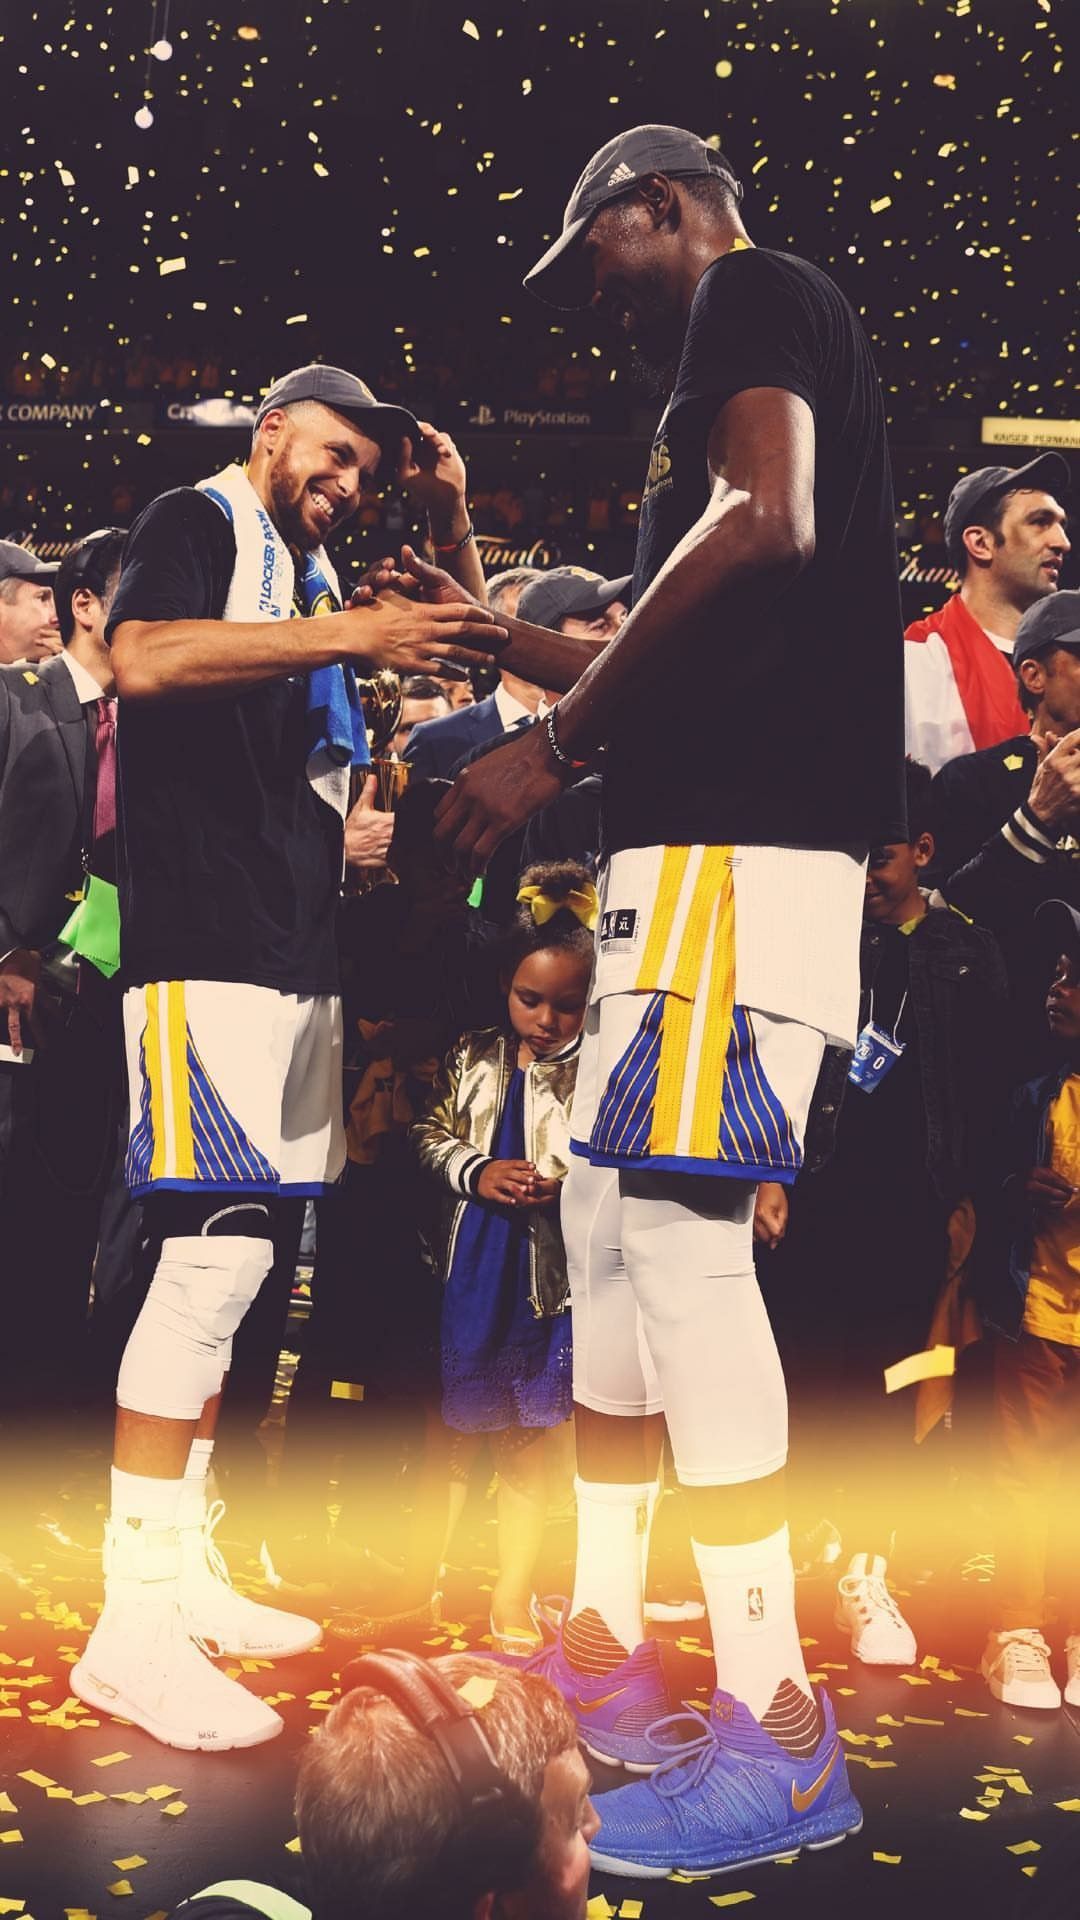 Stephen curry Kevin Durant wallpaper. Stephen curry wallpaper, Stephen curry basketball, Curry wallpaper